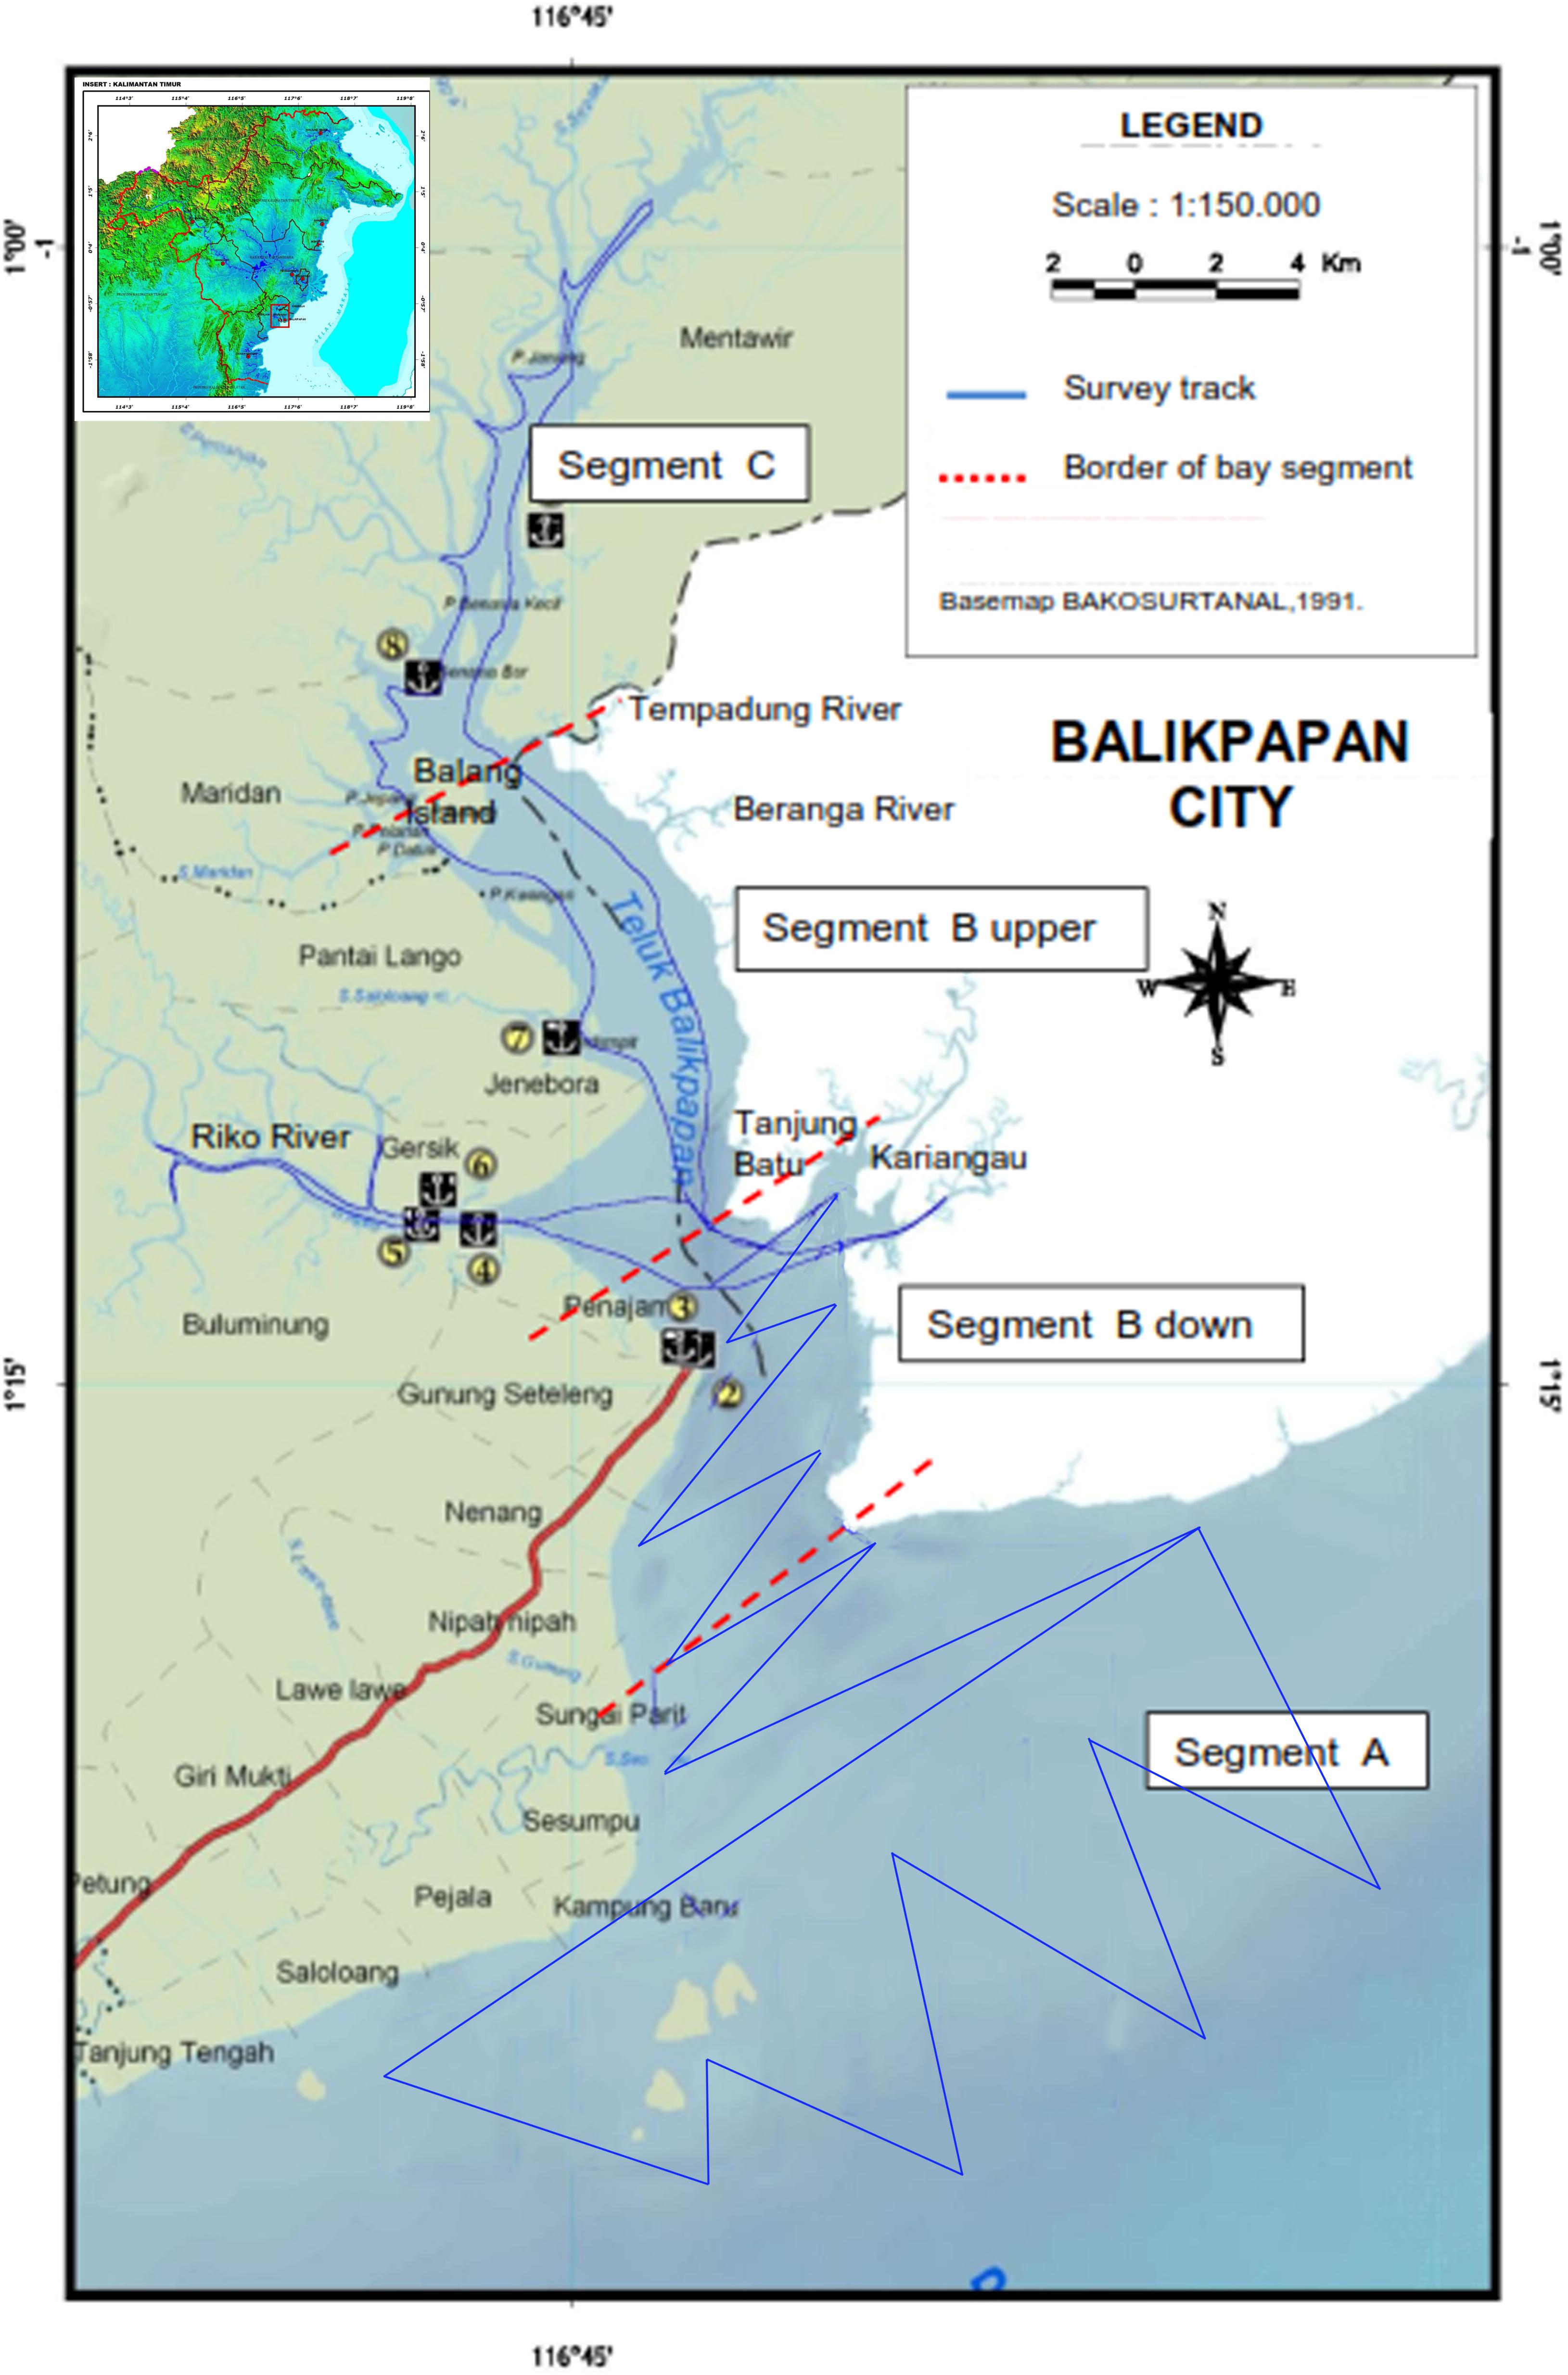 Frontiers Long Term Population And Distribution Dynamics Of An Endangered Irrawaddy Dolphin Population In Balikpapan Bay Indonesia In Response To Coastal Development Marine Science